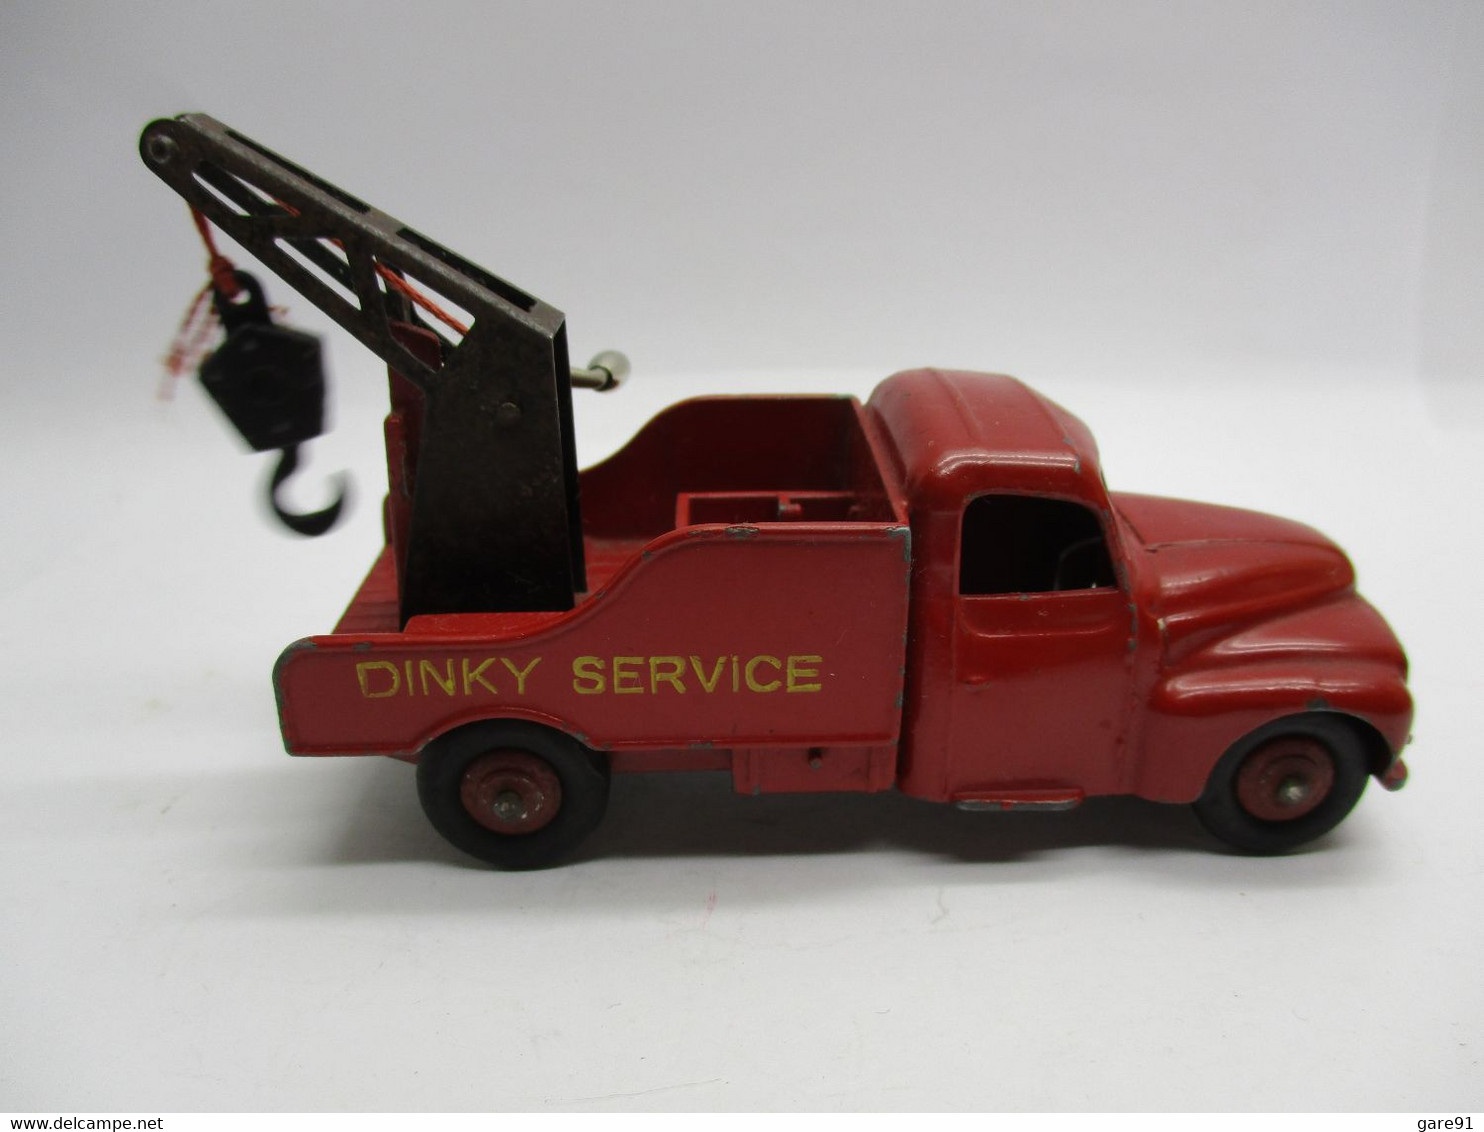 Ancien jouet dinky toy depannage -  France